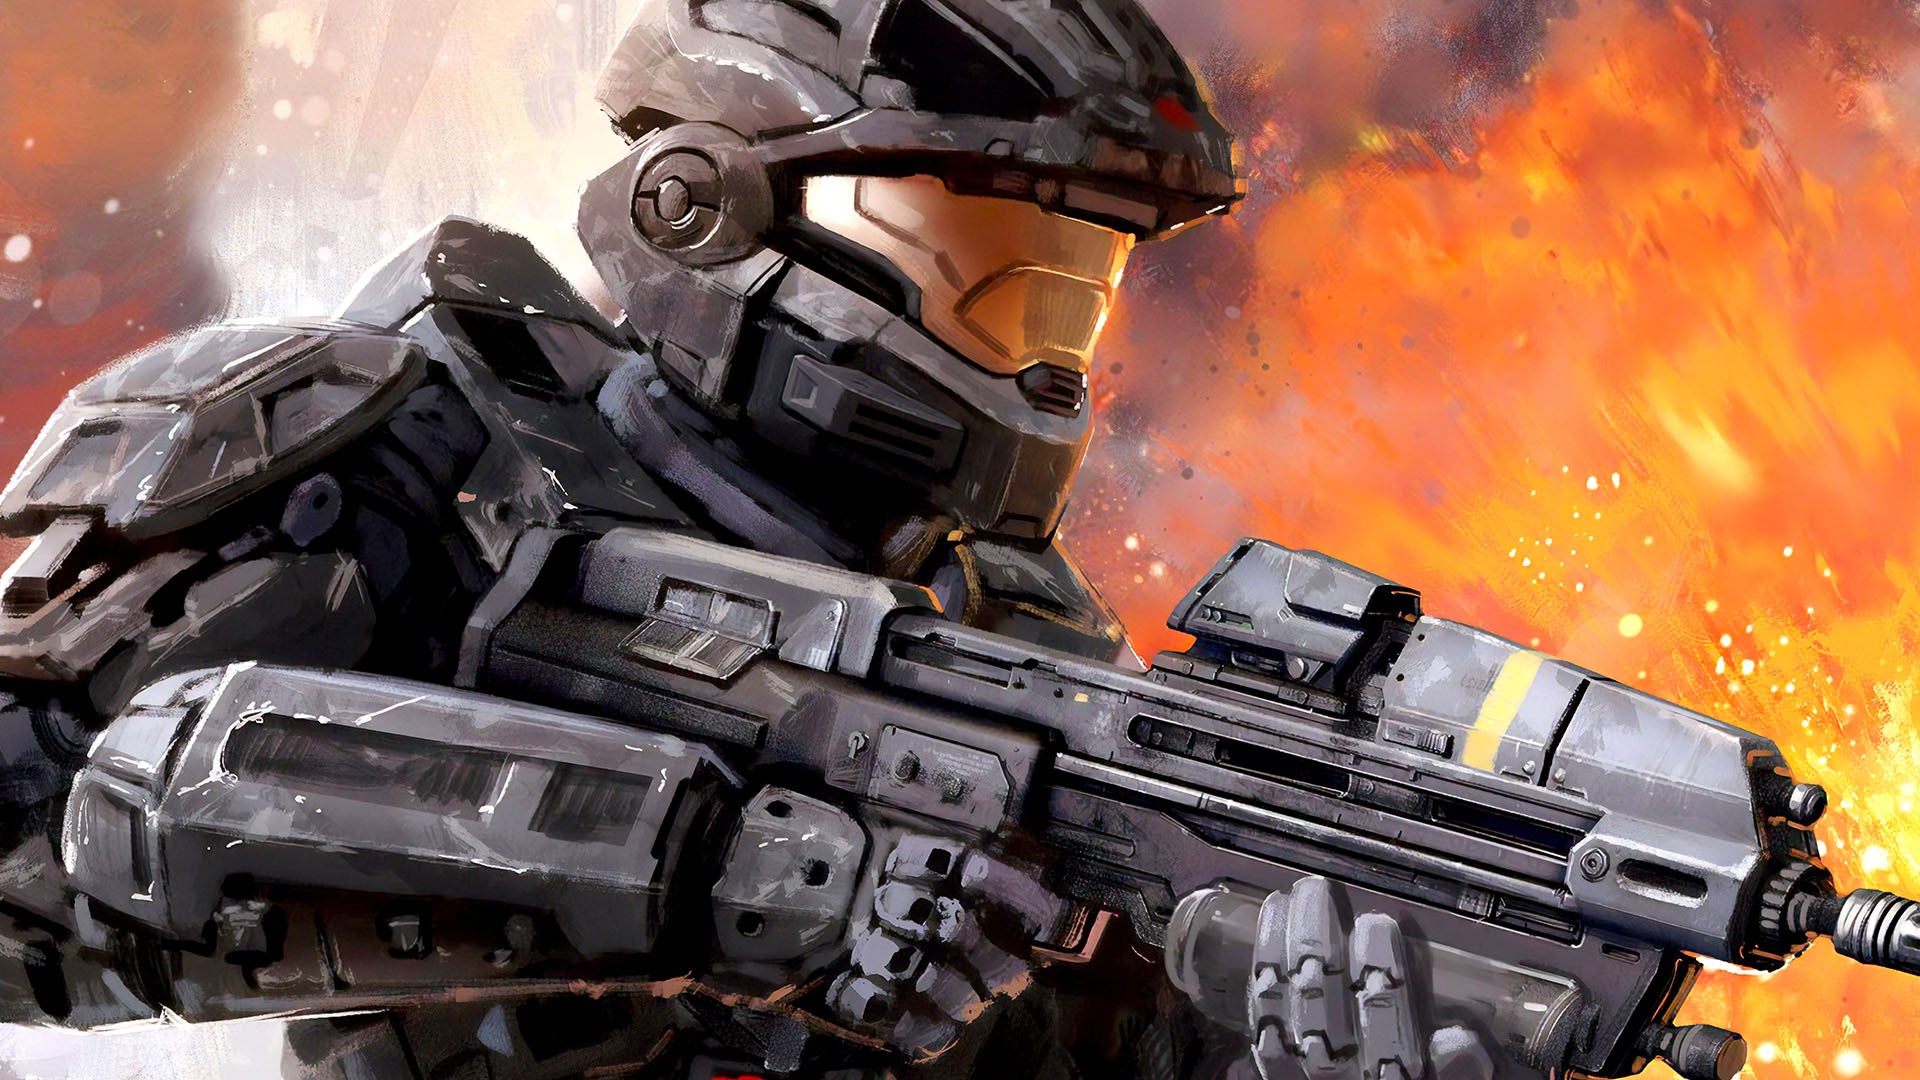 Image for Halo Reach PC/Xbox One Review: It's Good - But There Are Issues